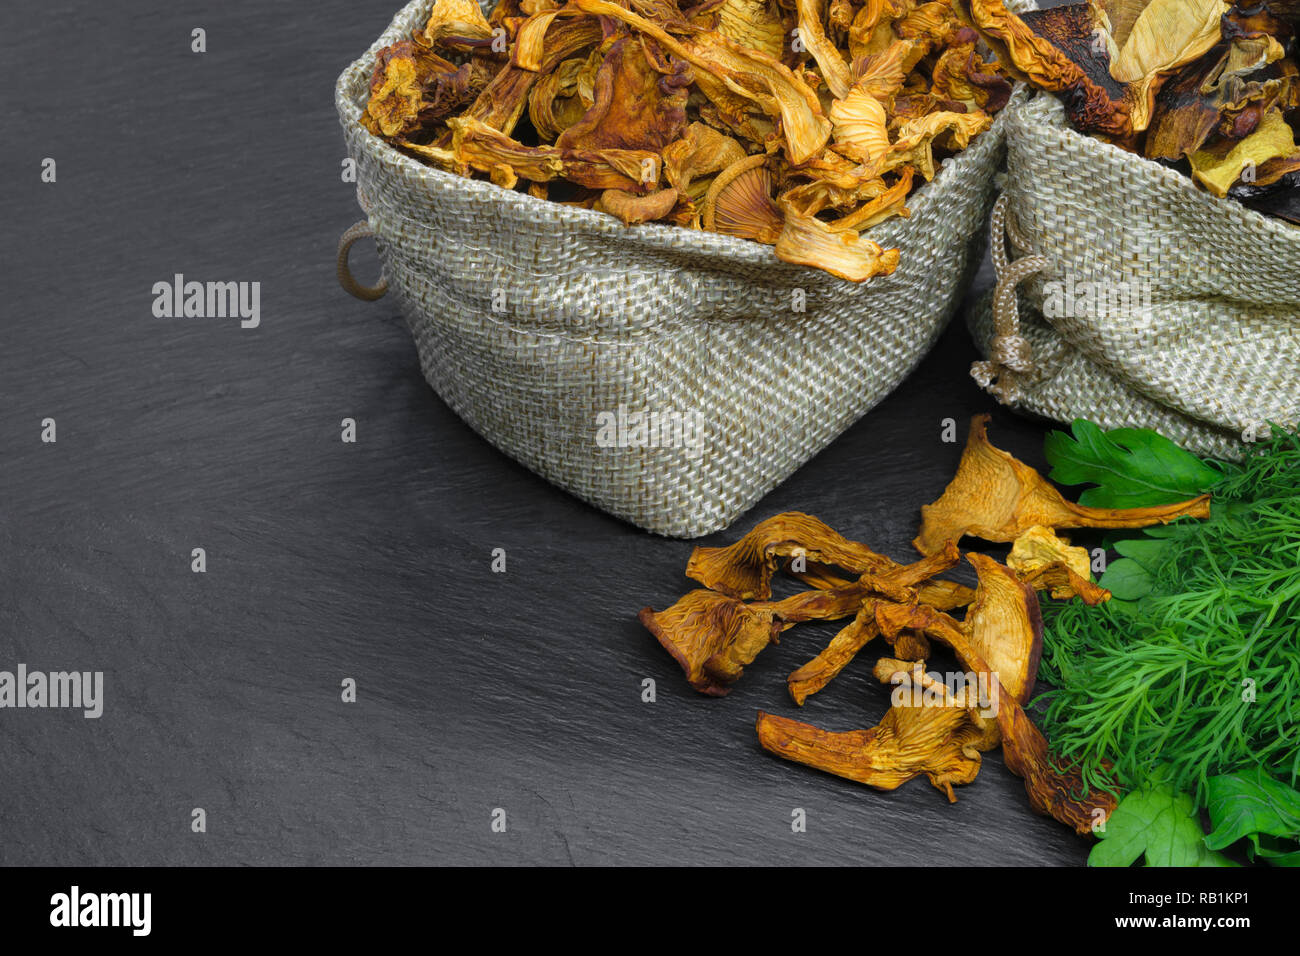 Composition of dry boletus and chanterelles mushrooms placed in canvas bags with dill and parsley broom on black stone background surface with copy sp Stock Photo